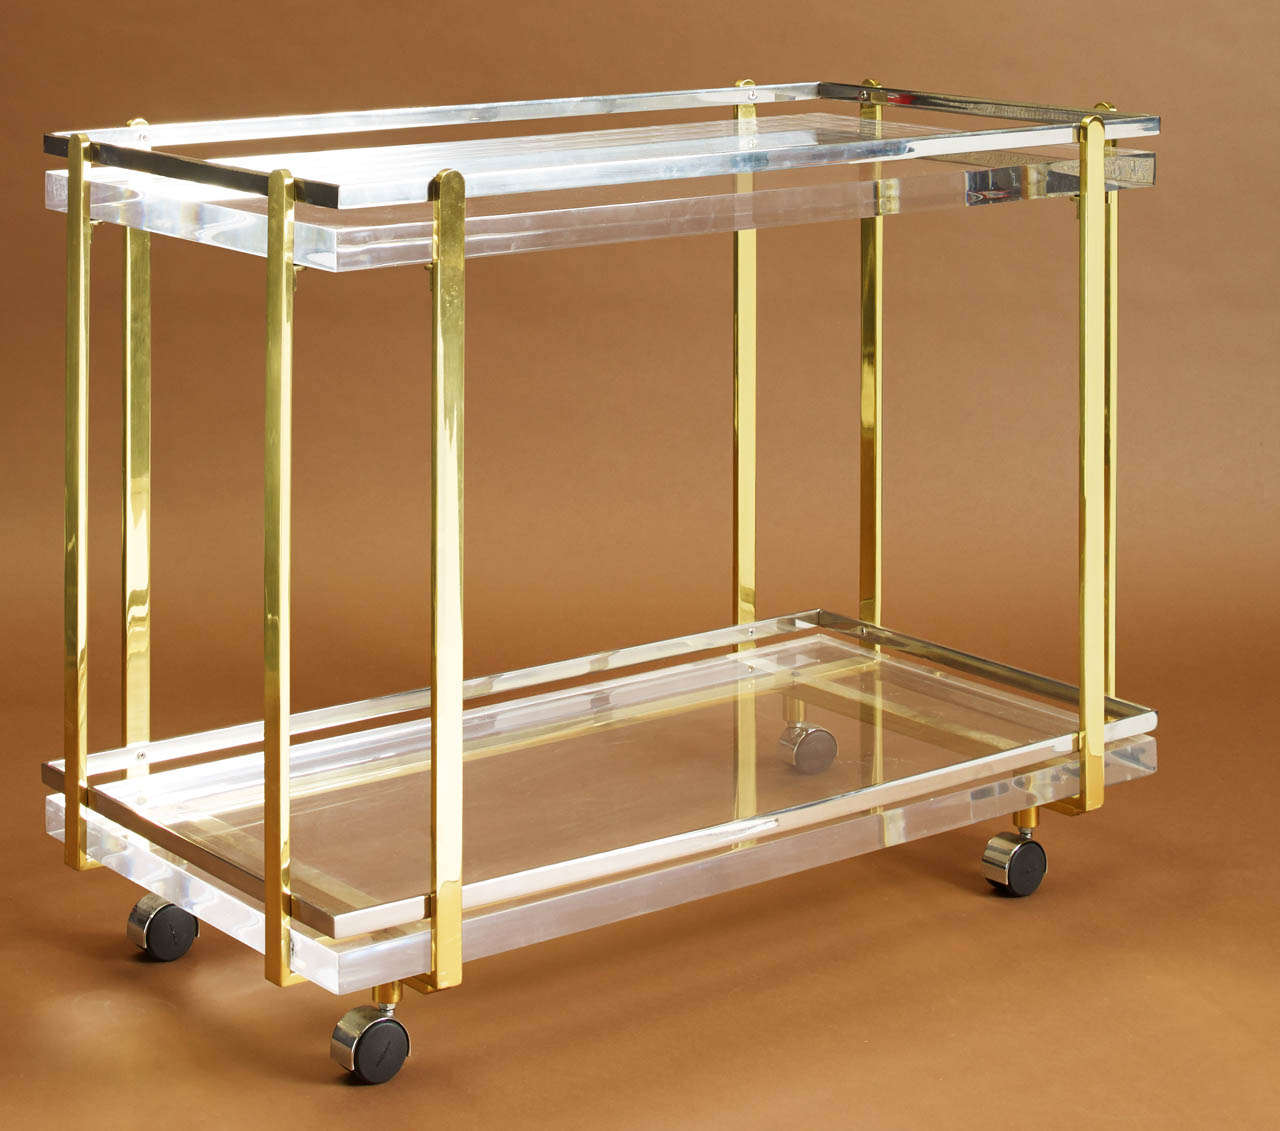 KARL SPRINGER (1930-1991)
Mixed metal framed bar cart in brass and chrome on casters with two lucite shelves
American, c. 1965